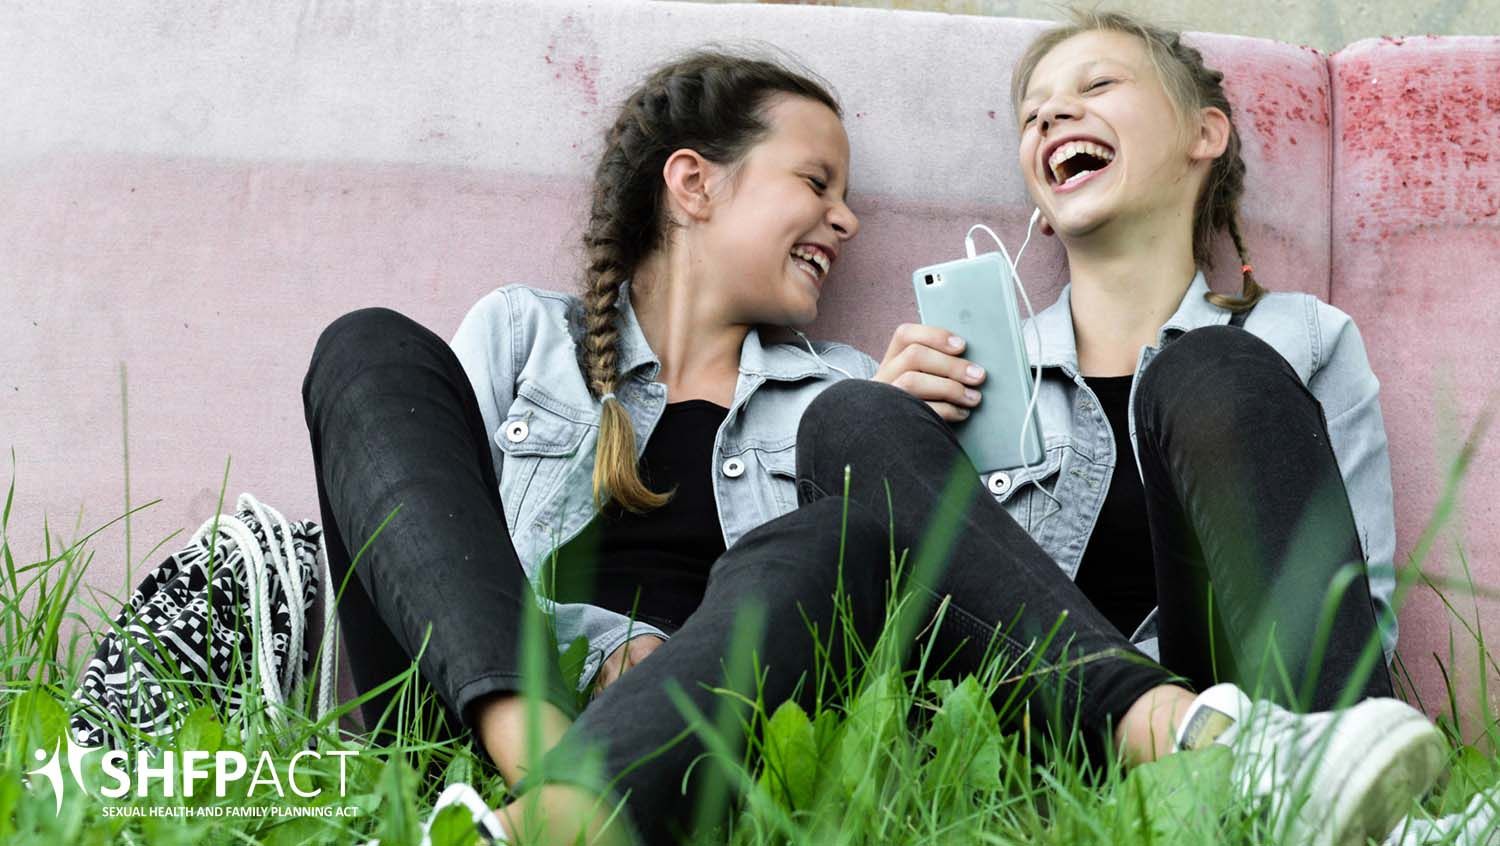 Two young girts sitting on the grass laughing together.